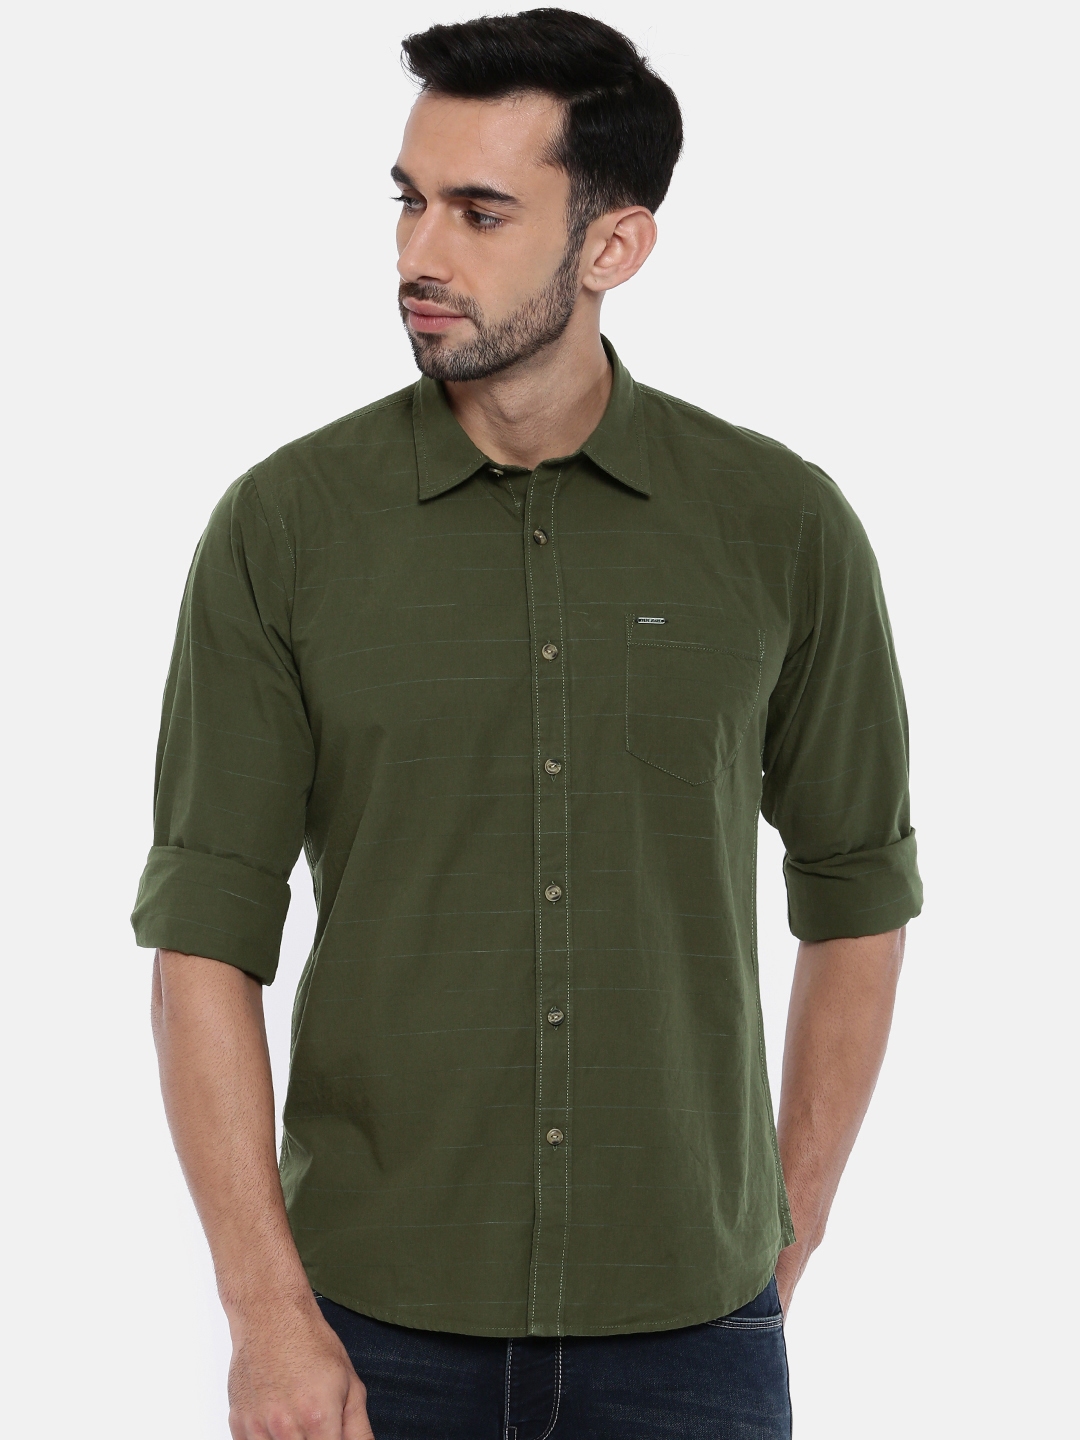 Buy Pepe Jeans Men Olive Green Regular Fit Striped Casual Shirt ...